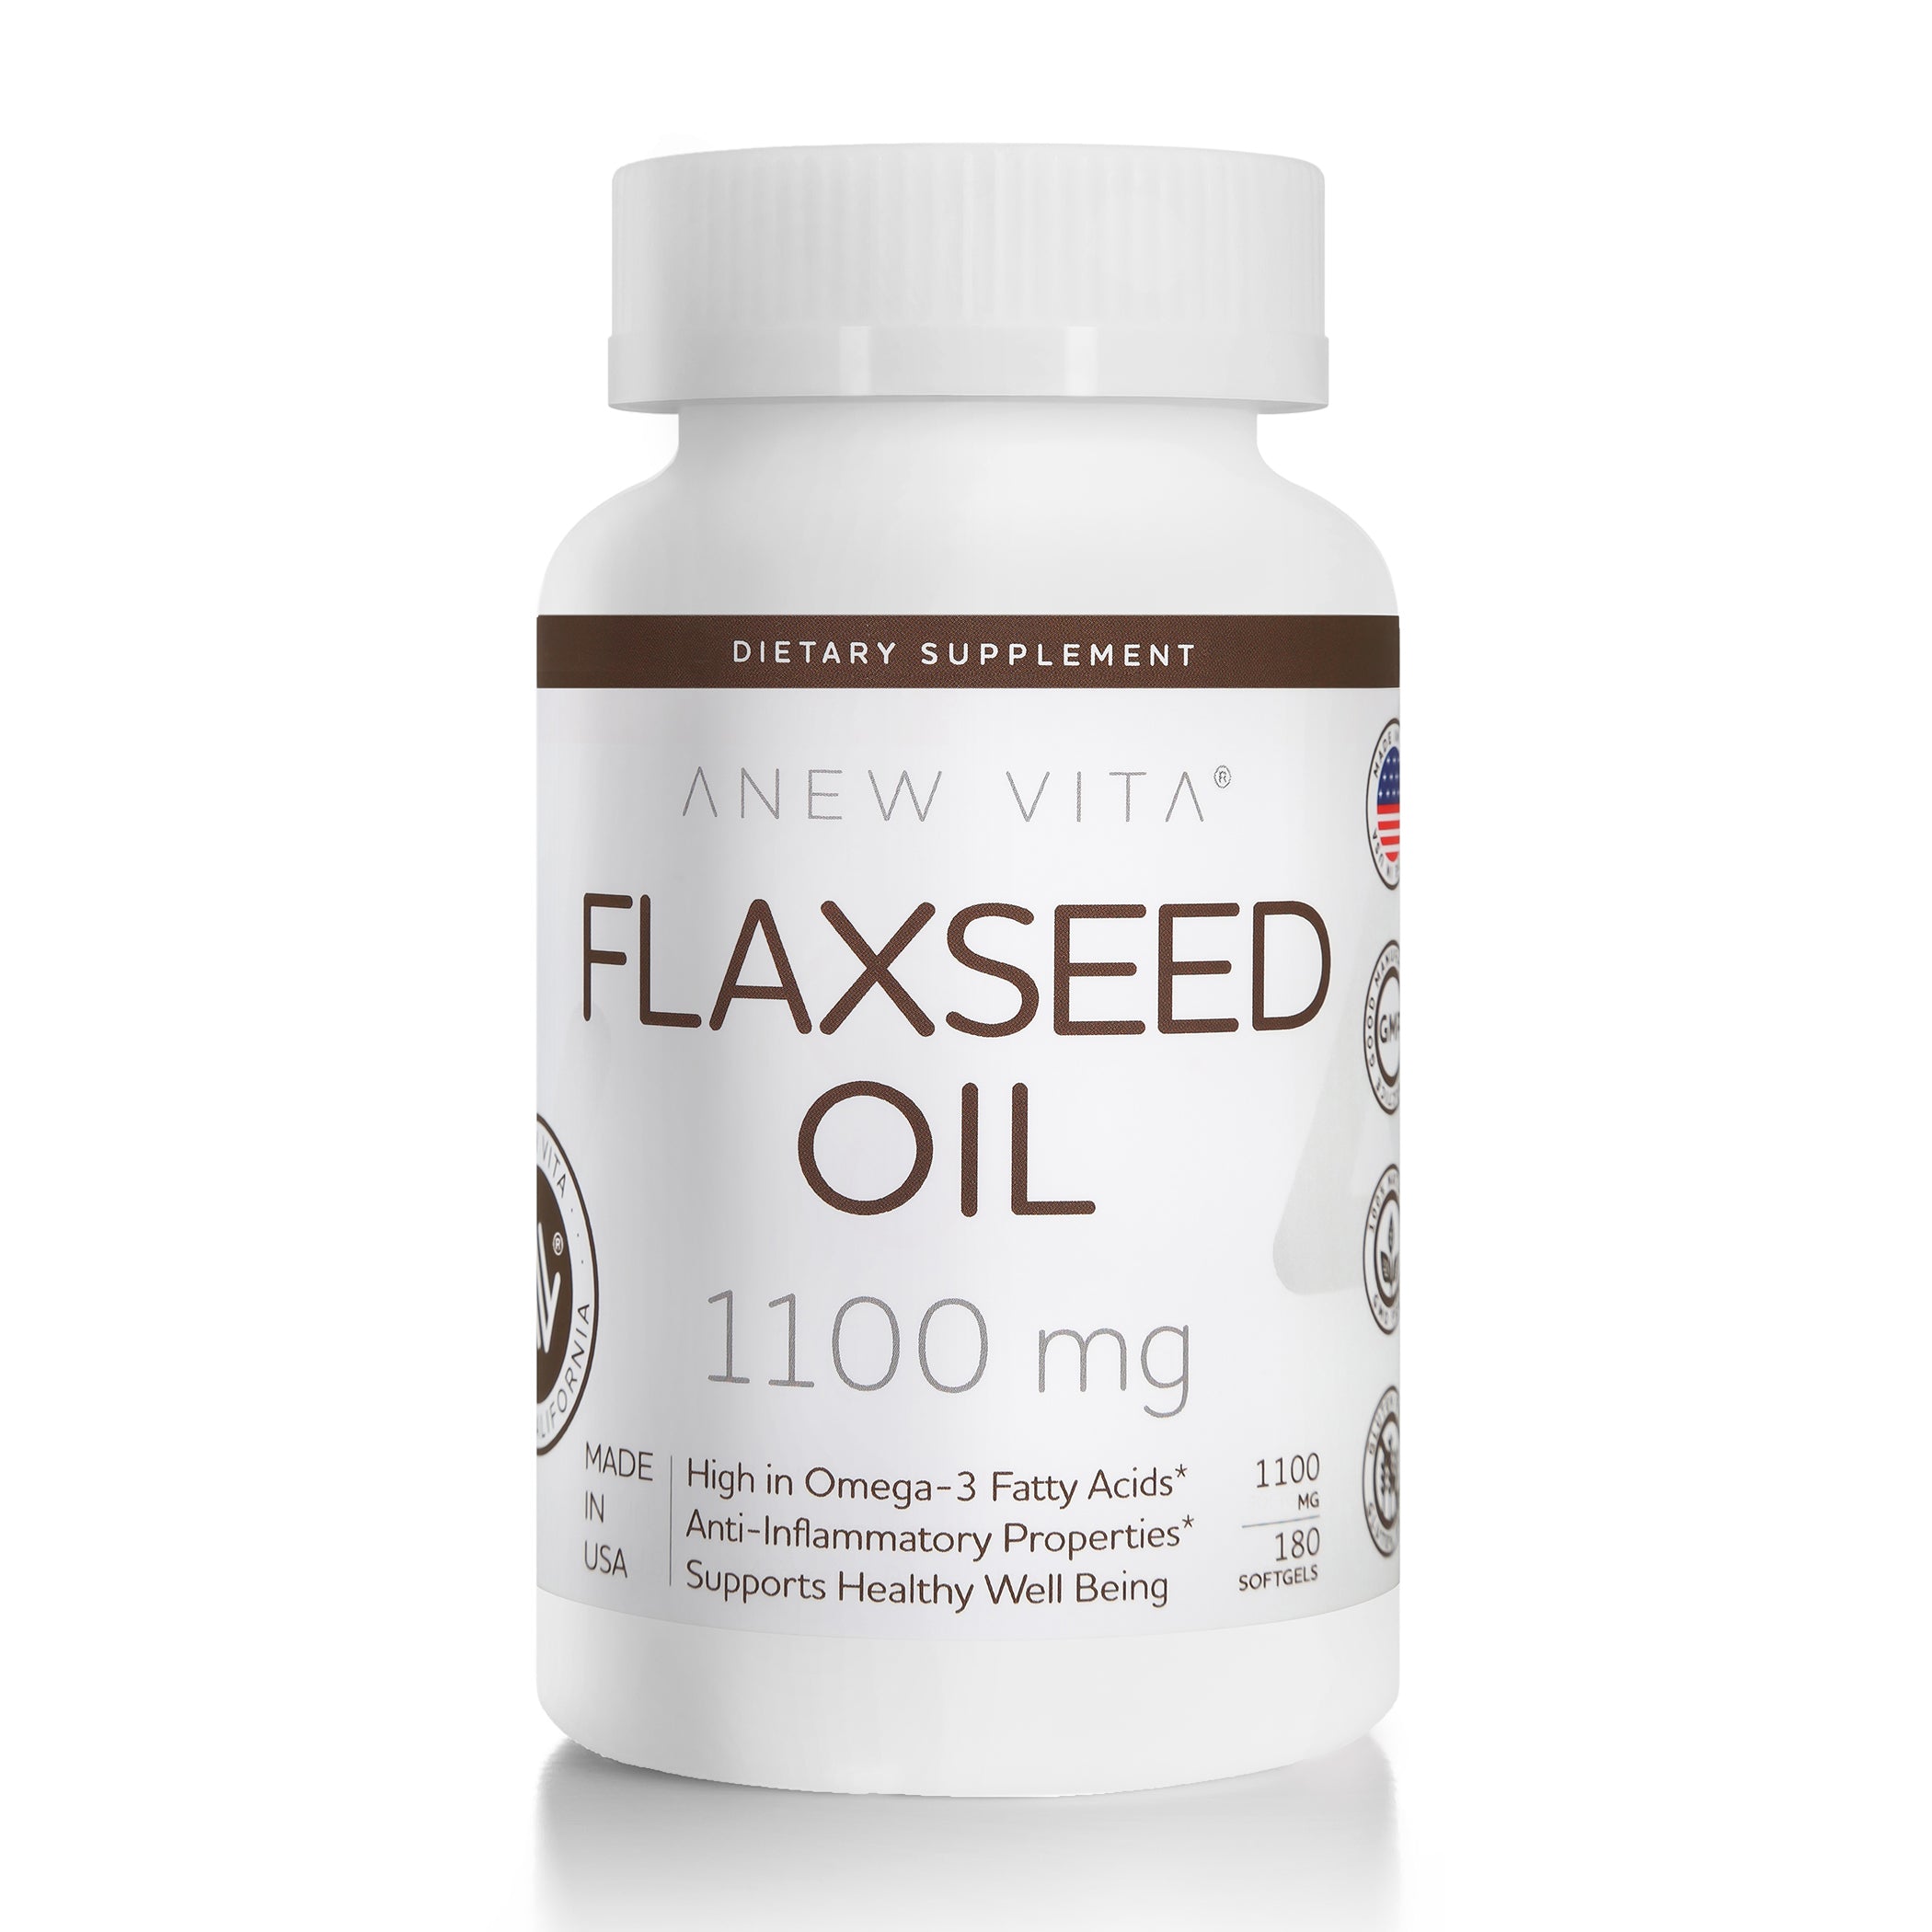 Flaxseed Oil: Benefits, Side Effects, Dosage, Precautions